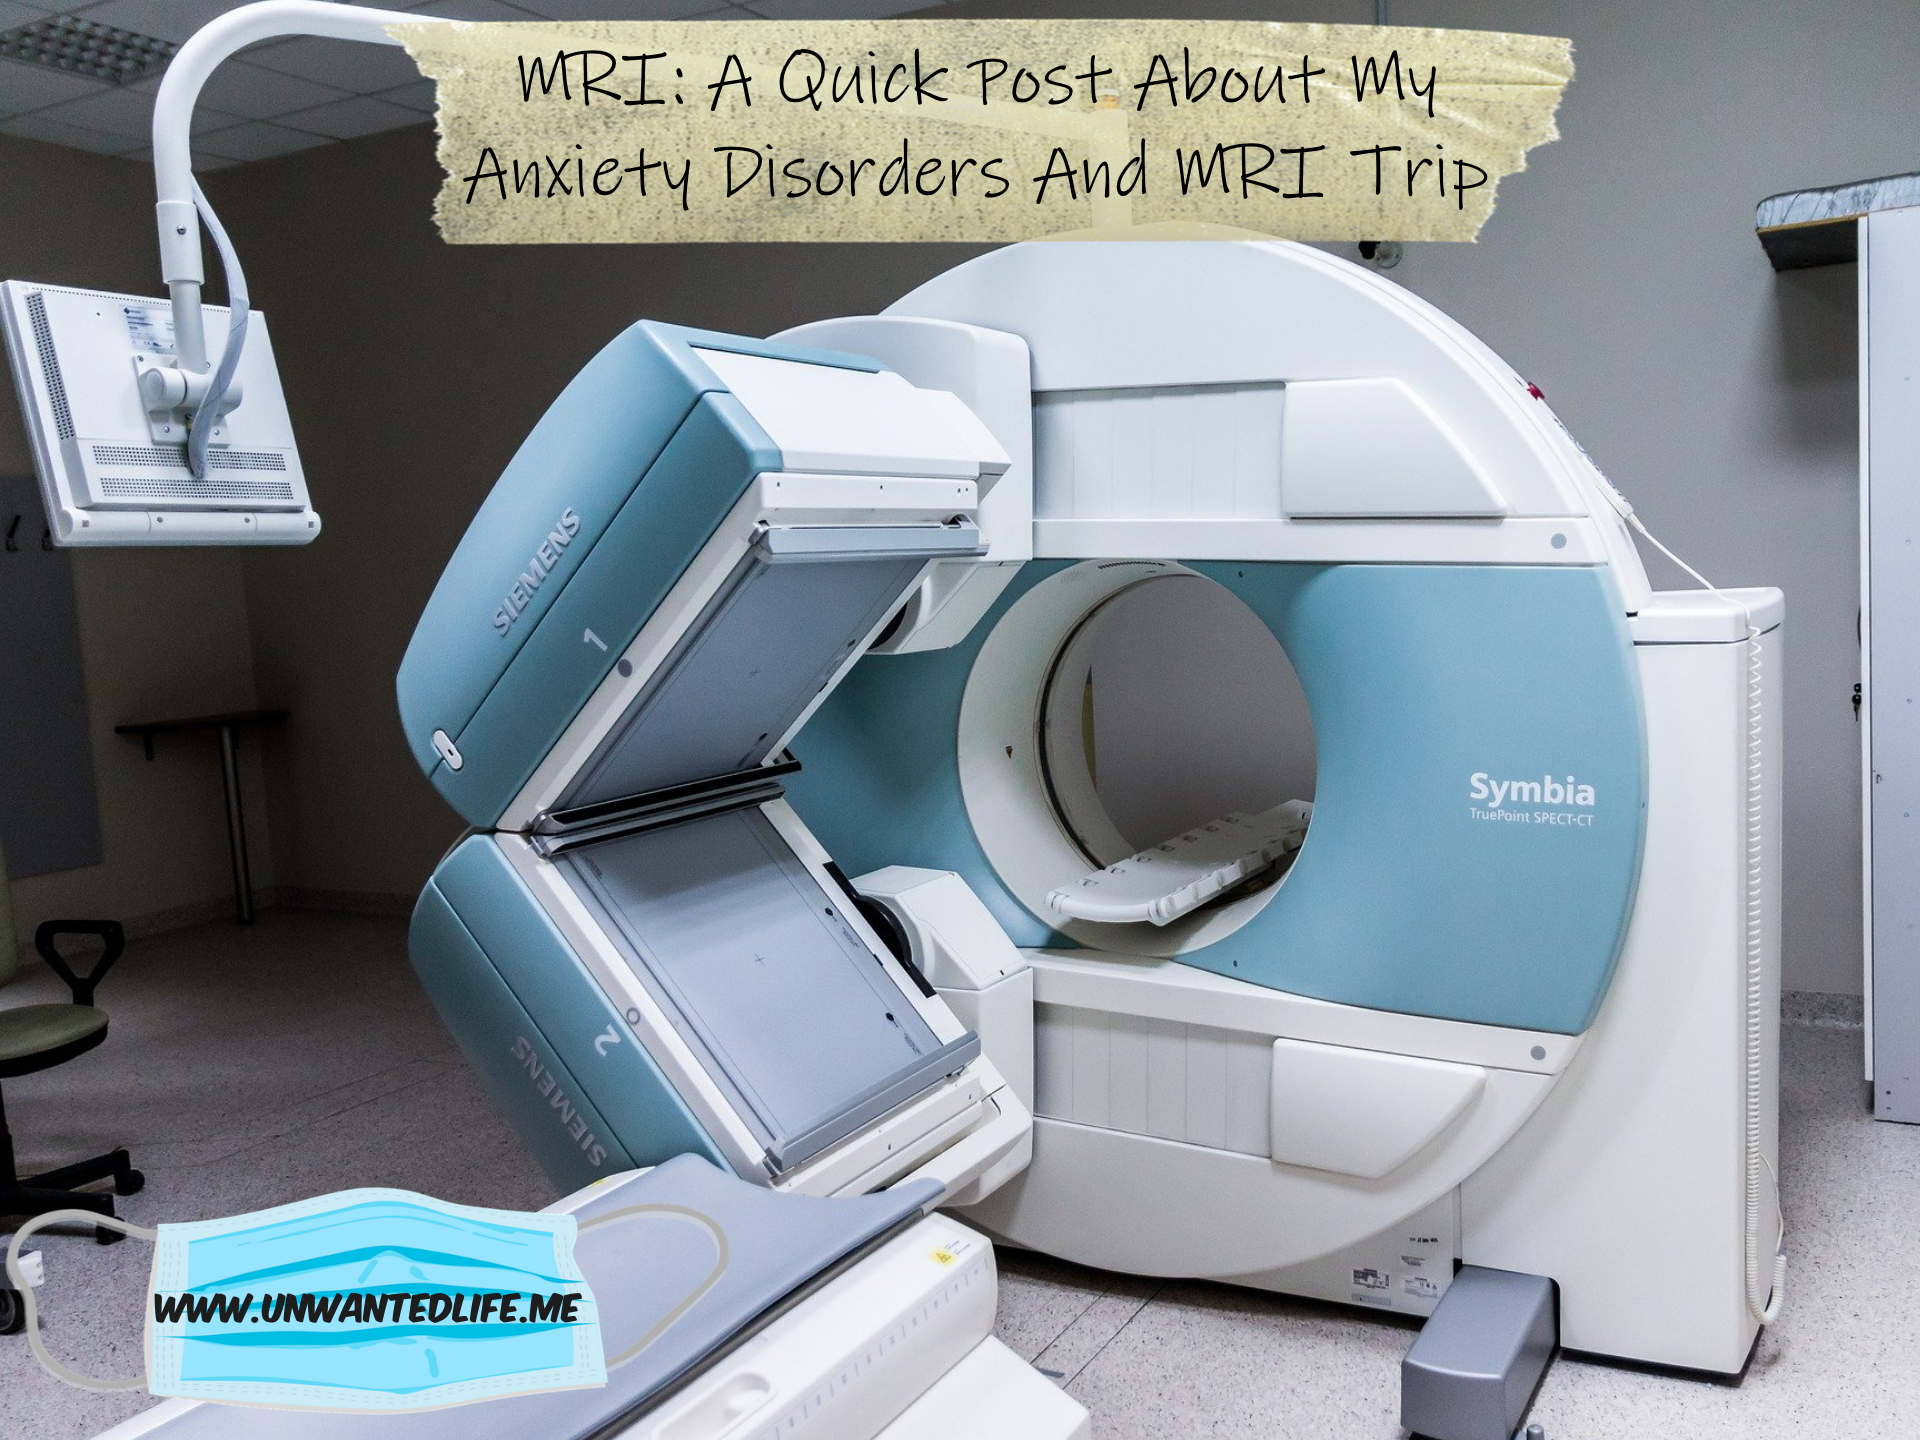 A photo of an MRI machine with the title of the article above it "MRI: A Quick Post About My Anxiety Disorders And MRI Trip"